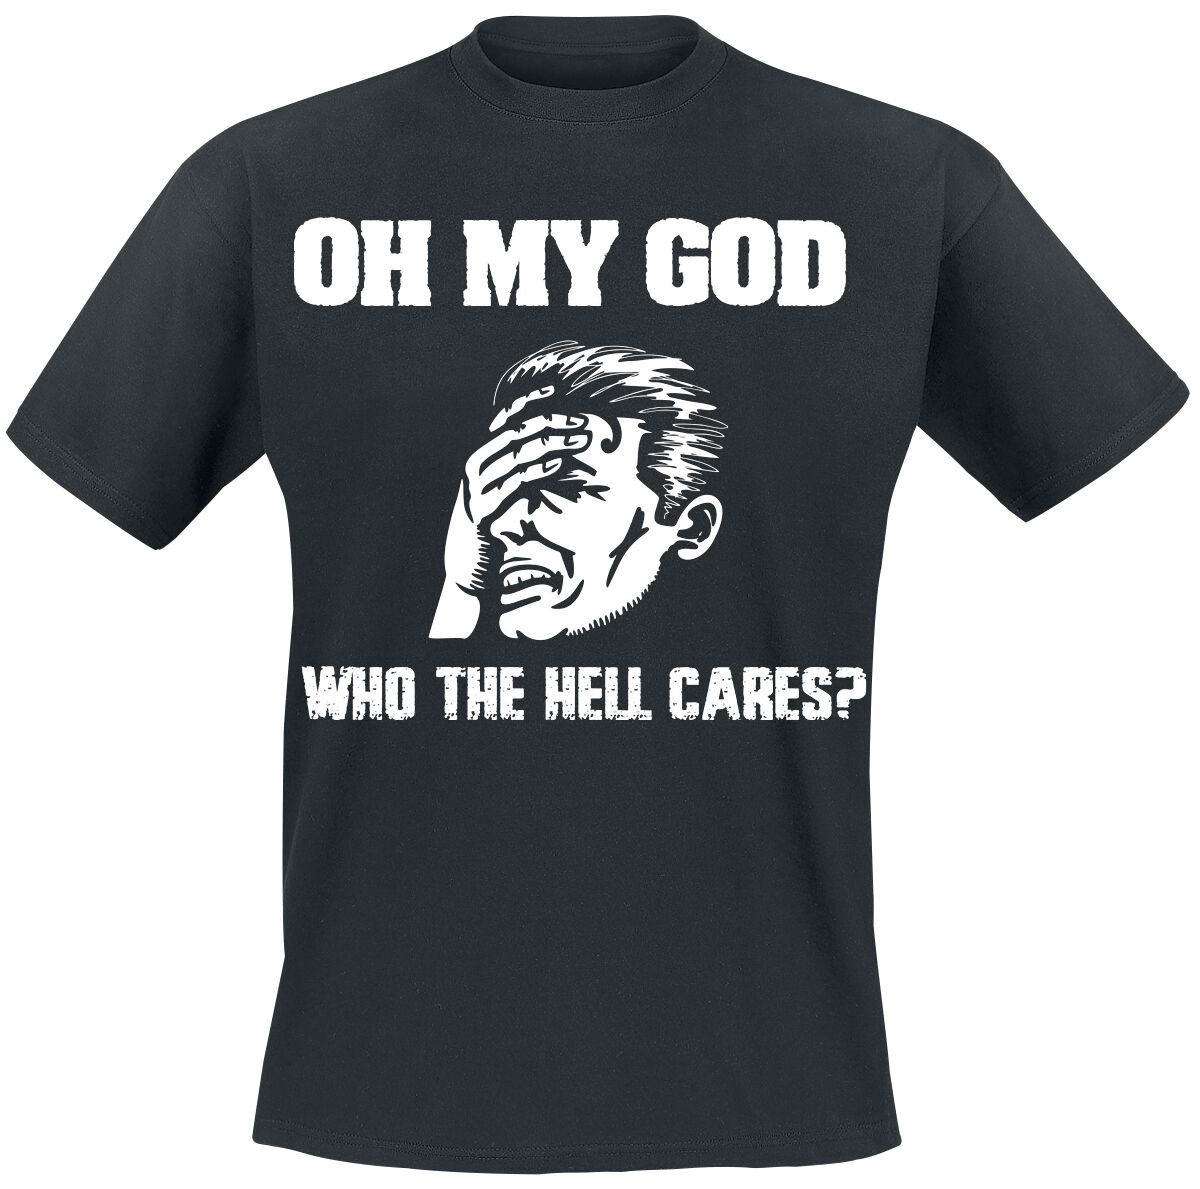 Slogans Oh My God - Who The Hell Cares? T-Shirt black